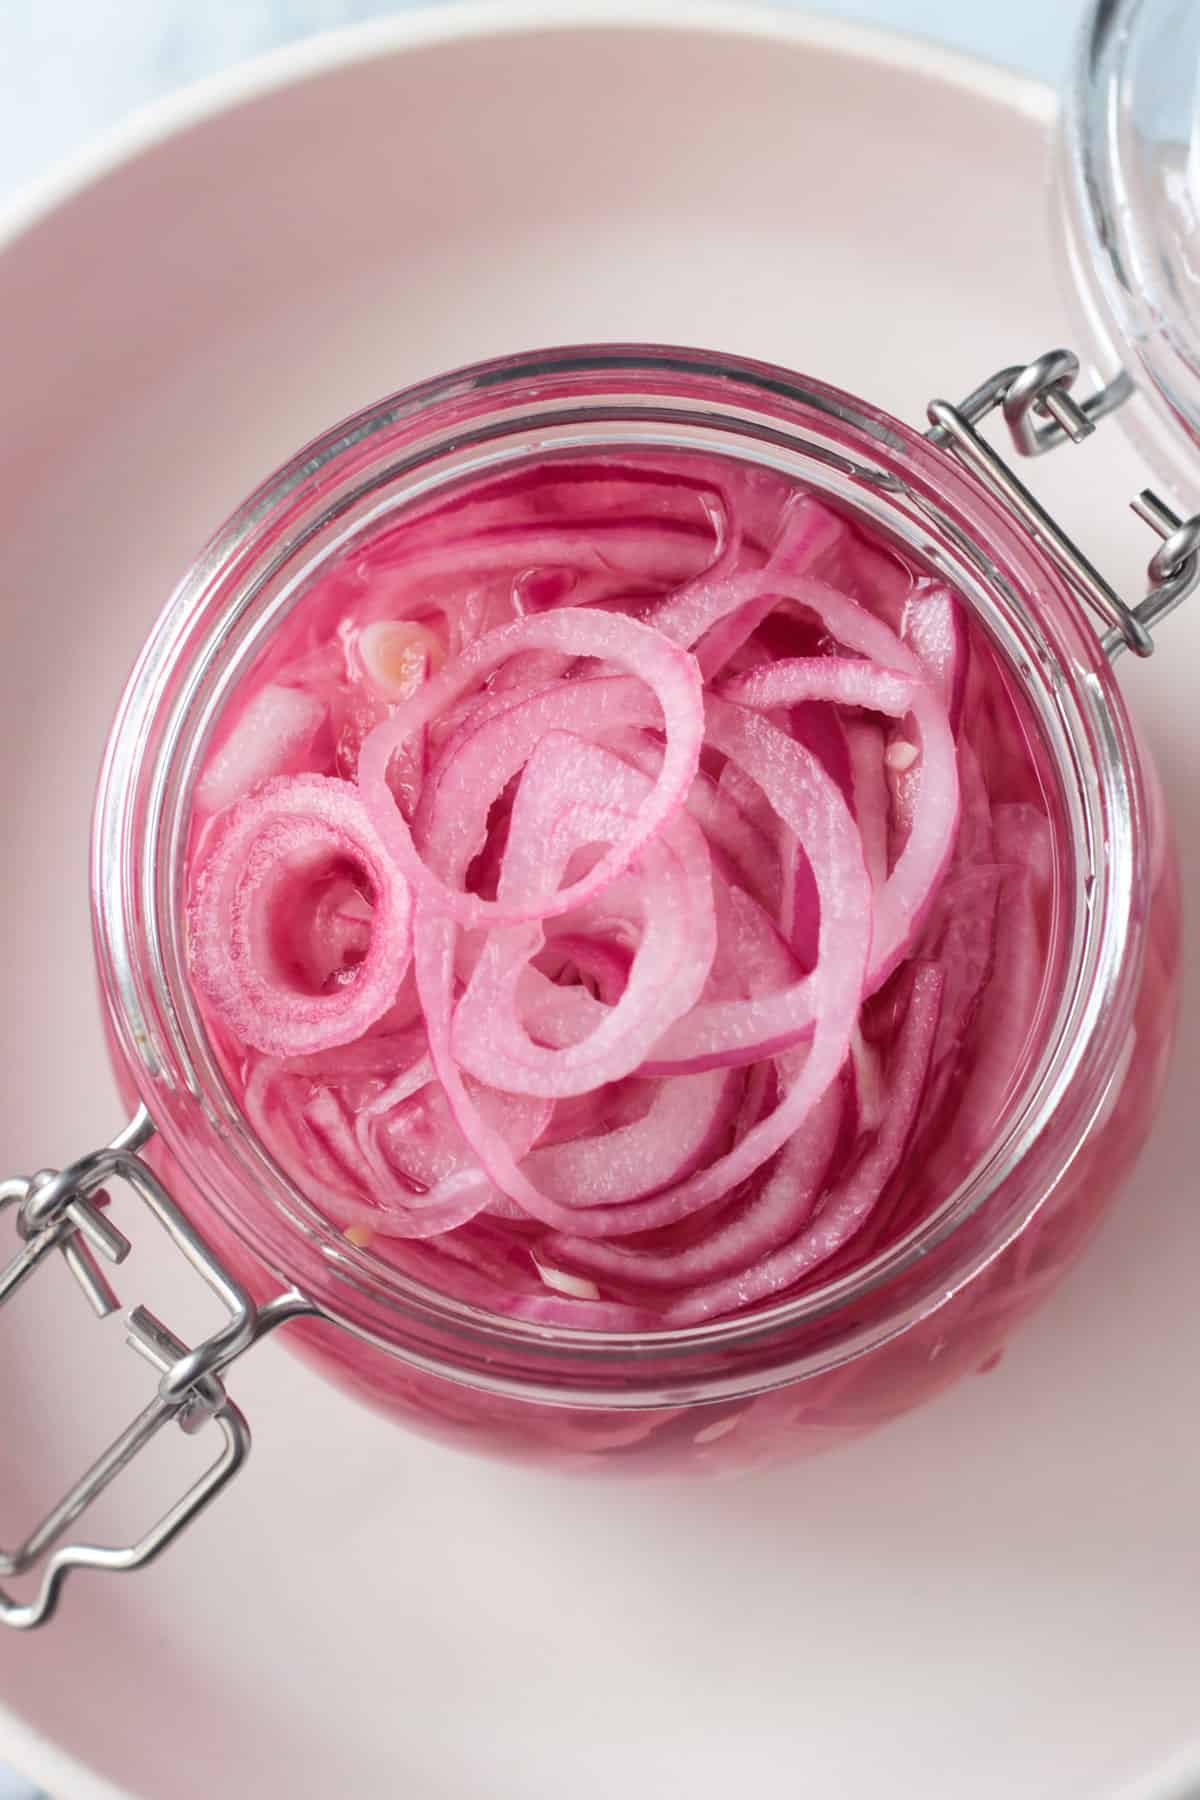 Overhead view of a jar of pickled red onions.